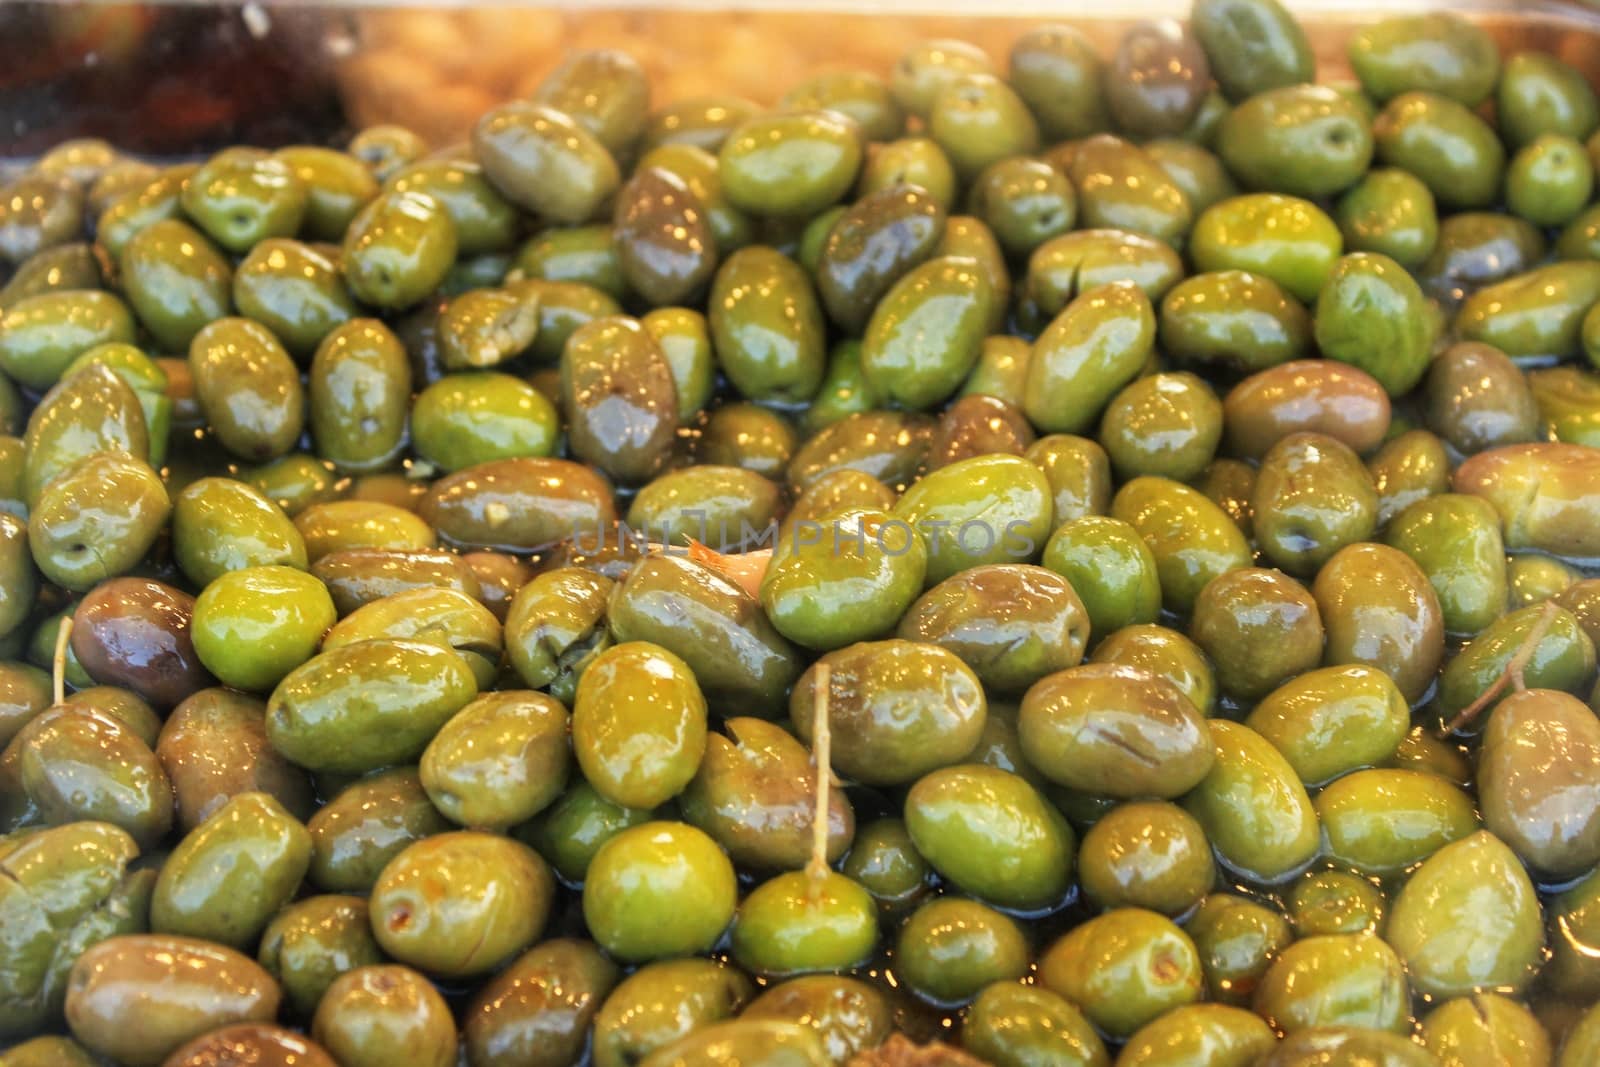 Olives texture at a market stall by soniabonet